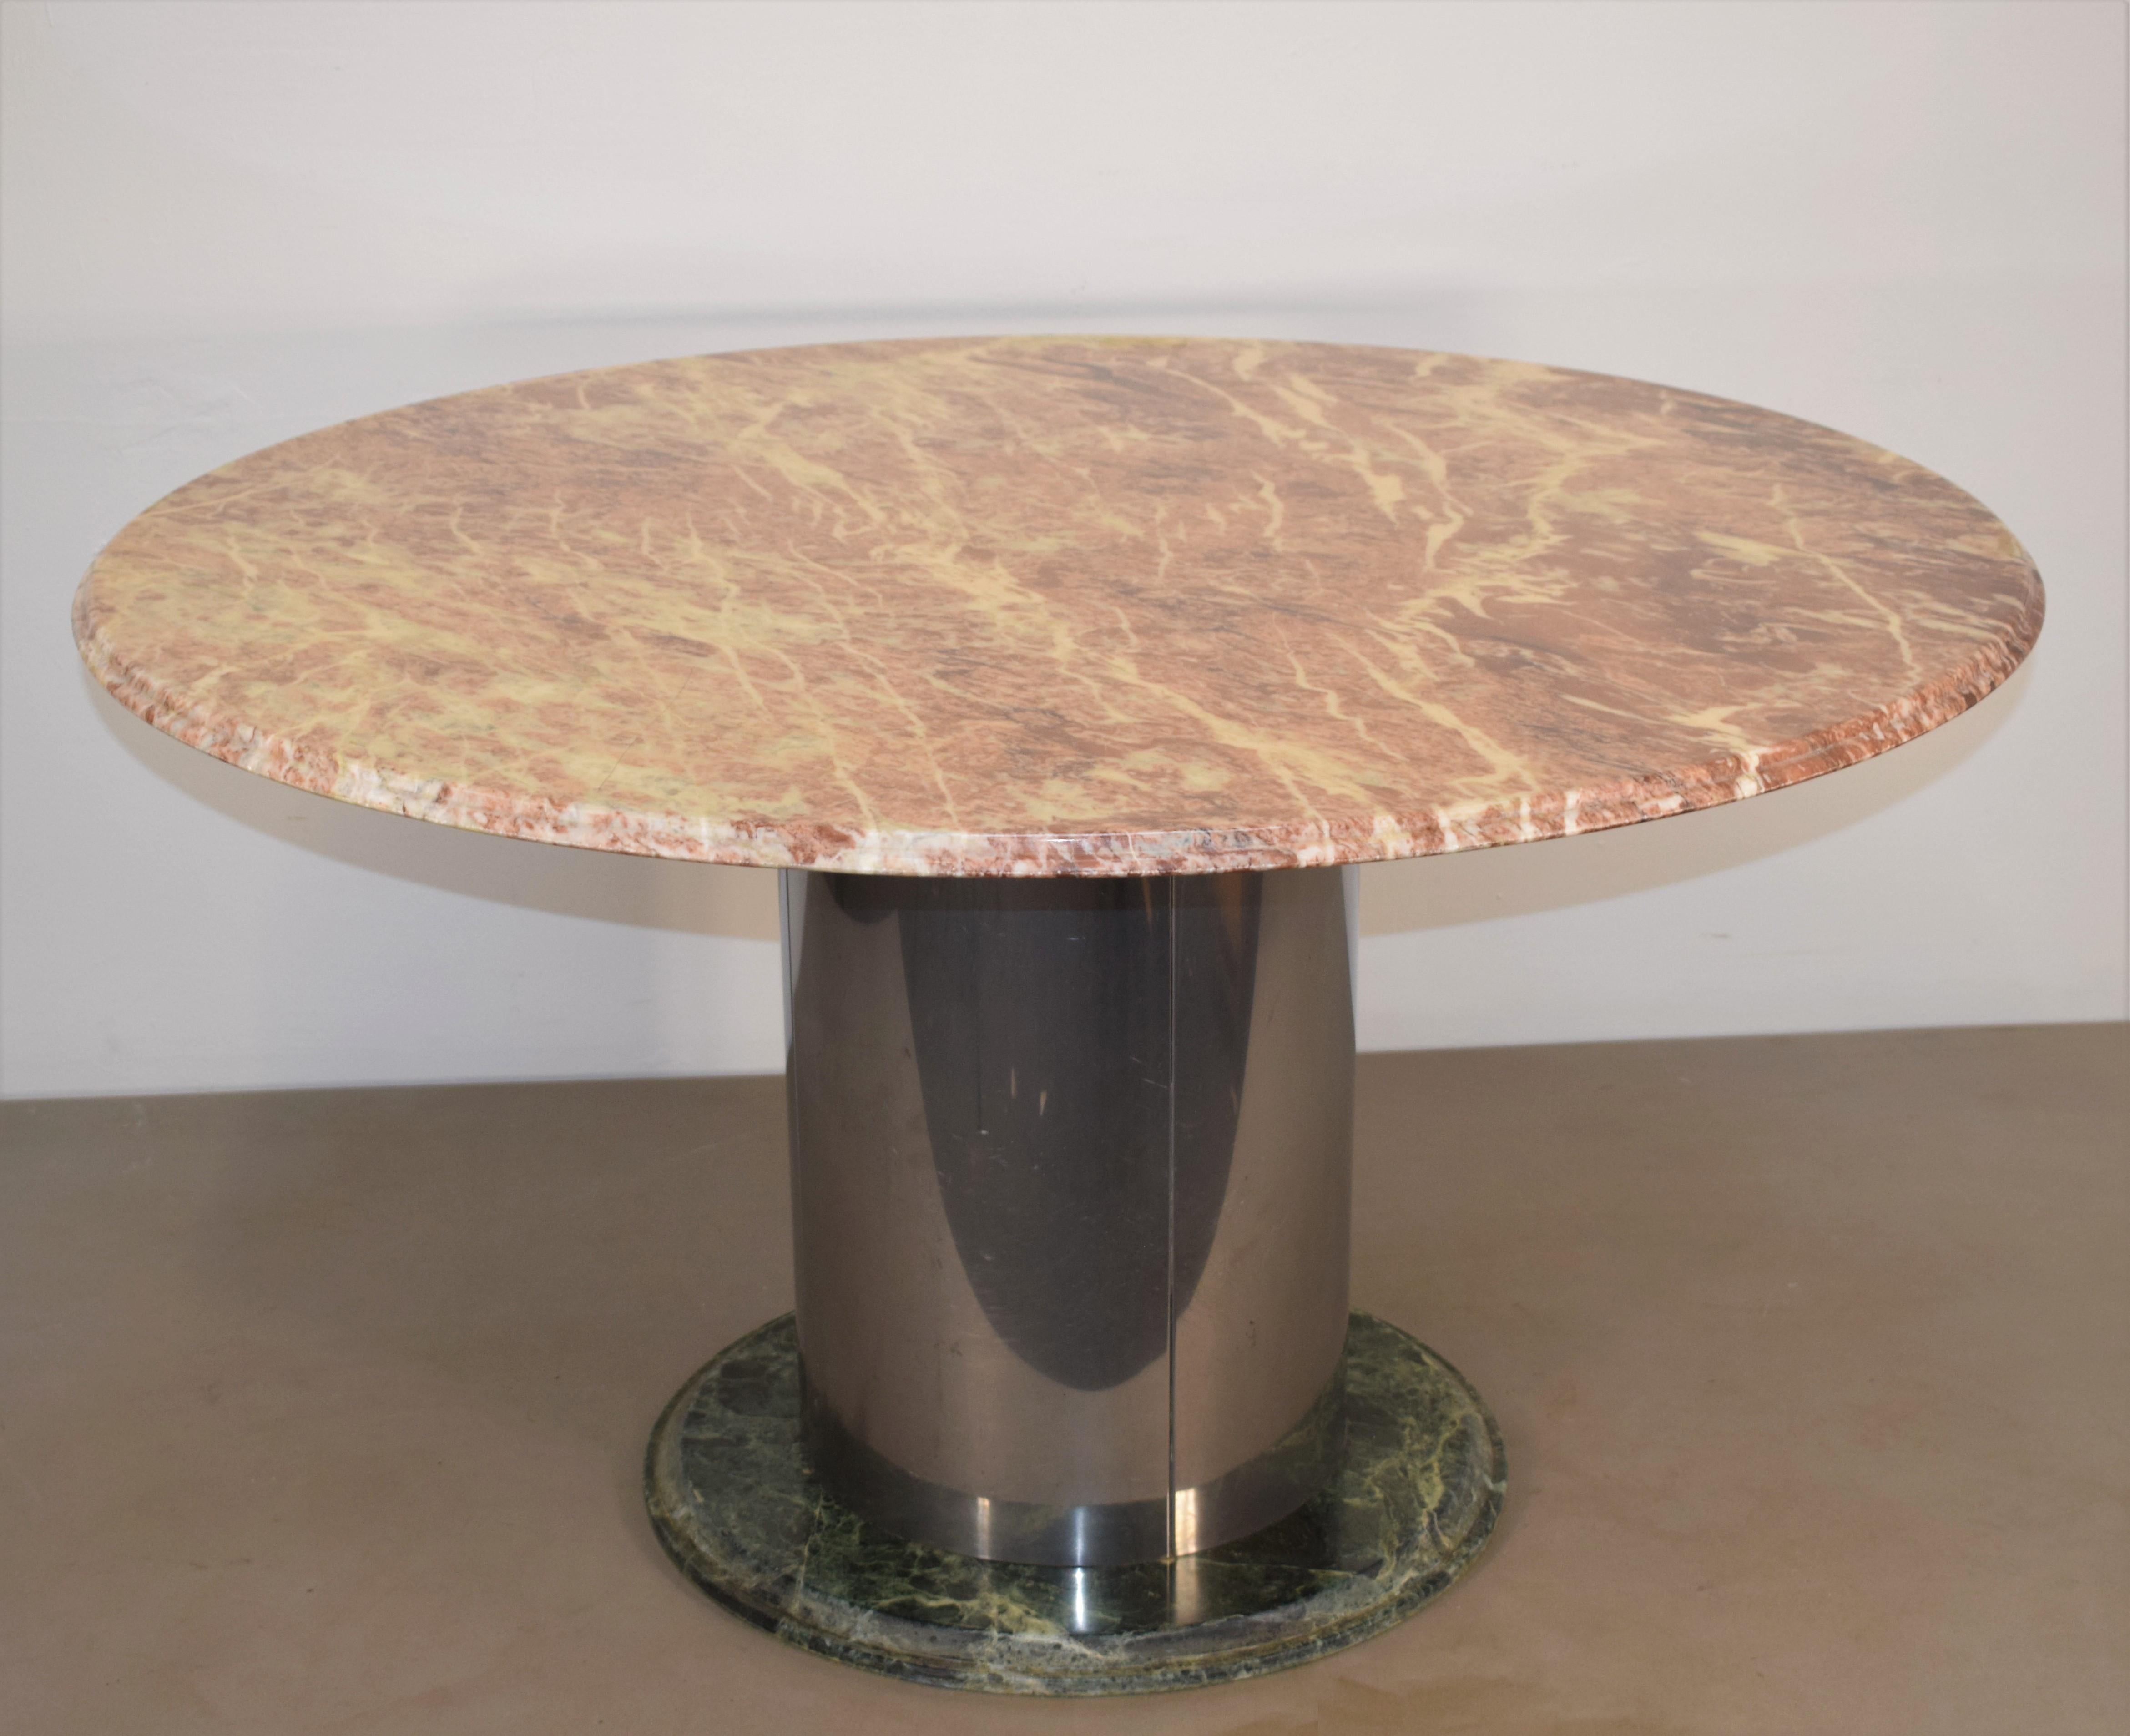 Italian round table, marble and steel, 1970s.

Dimensions: H= 67 cm; D= 123 cm; Depth marble = 2 cm.